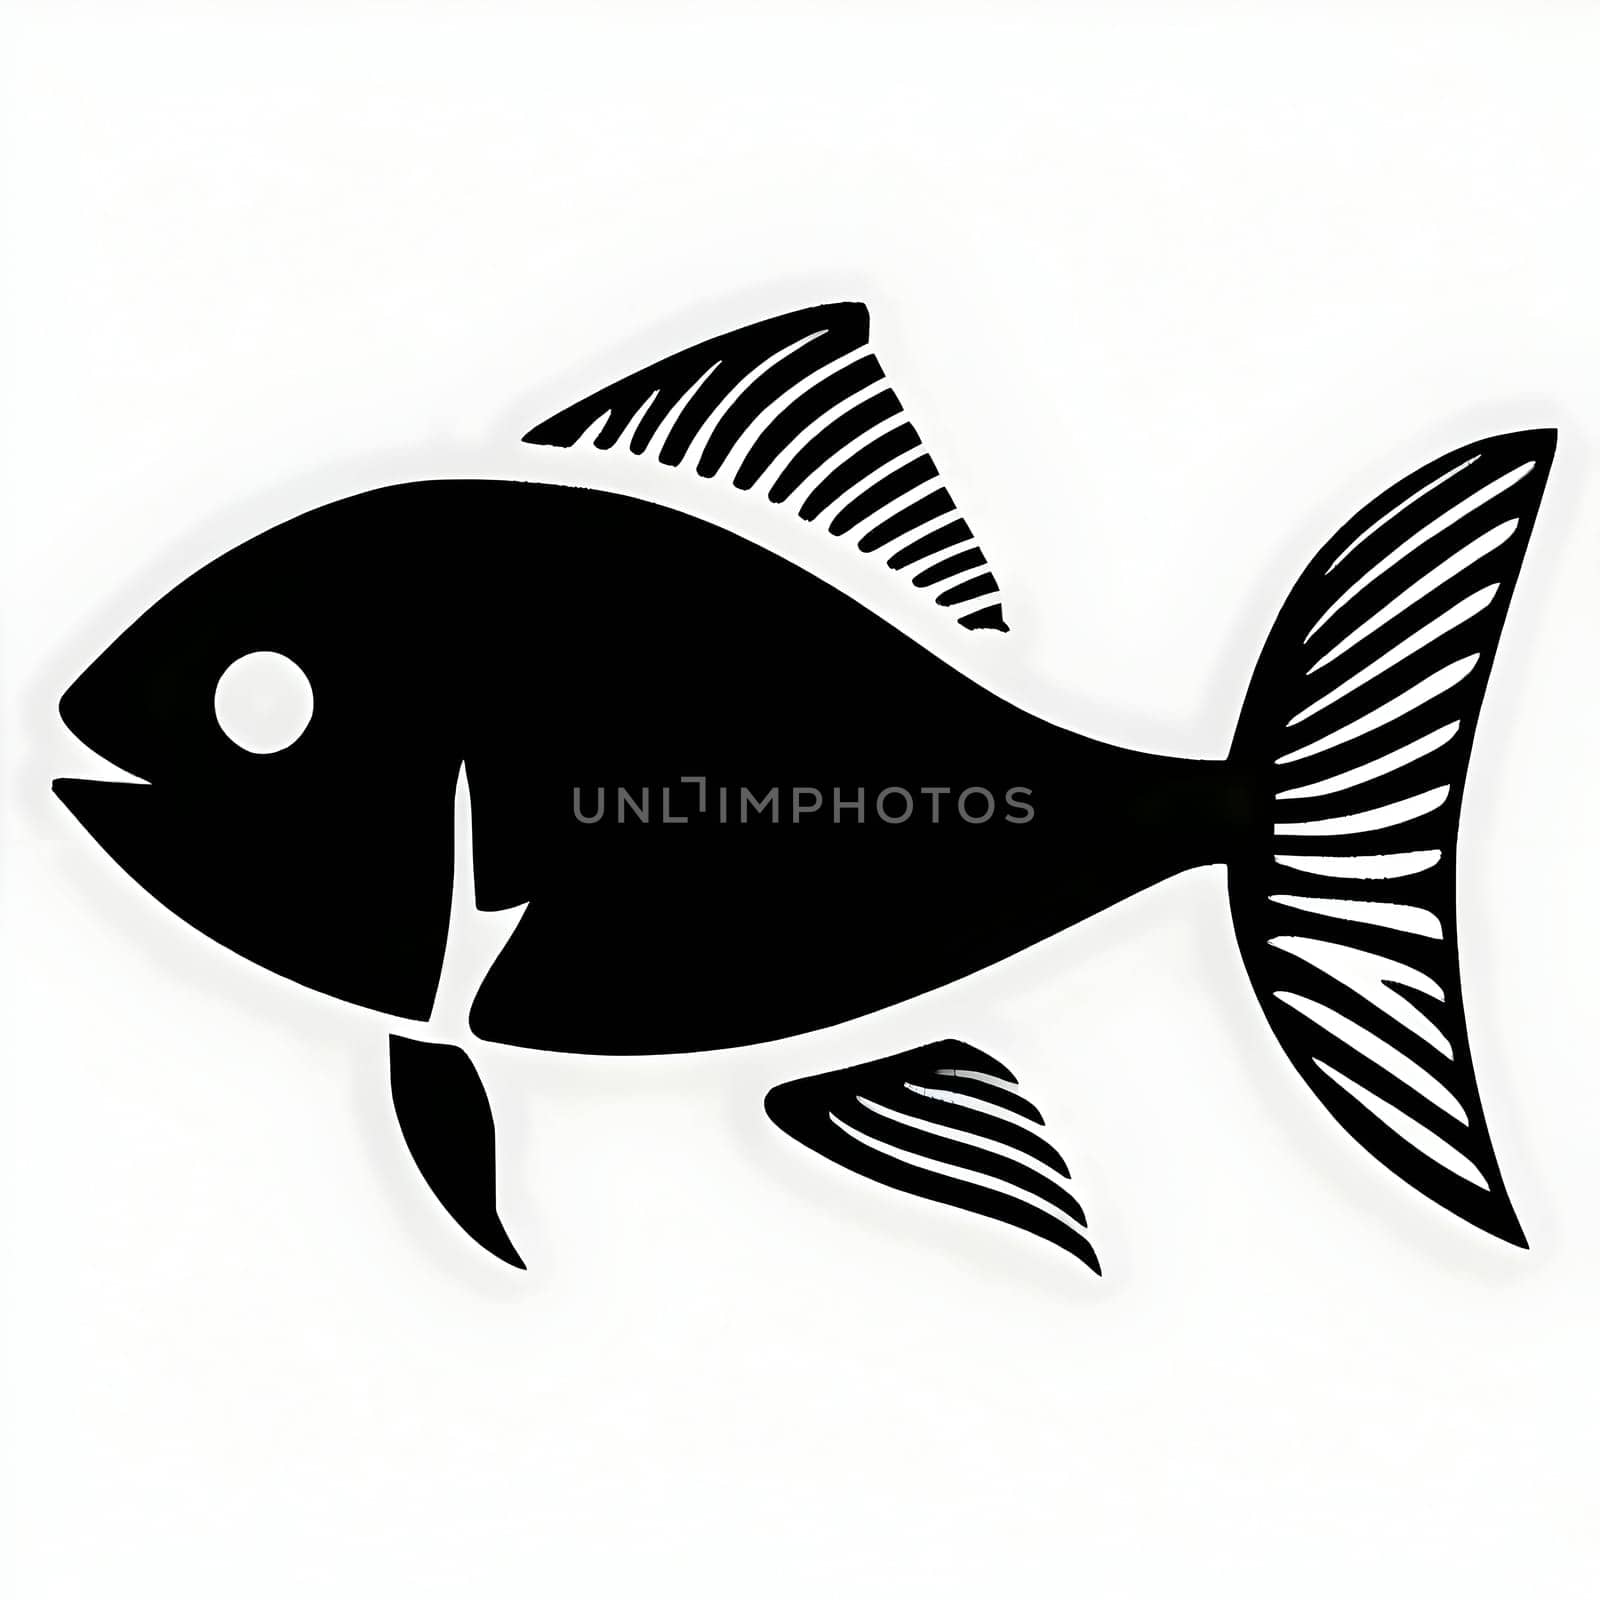 Vector illustration of a fish in black silhouette against a clean white background, capturing graceful forms.